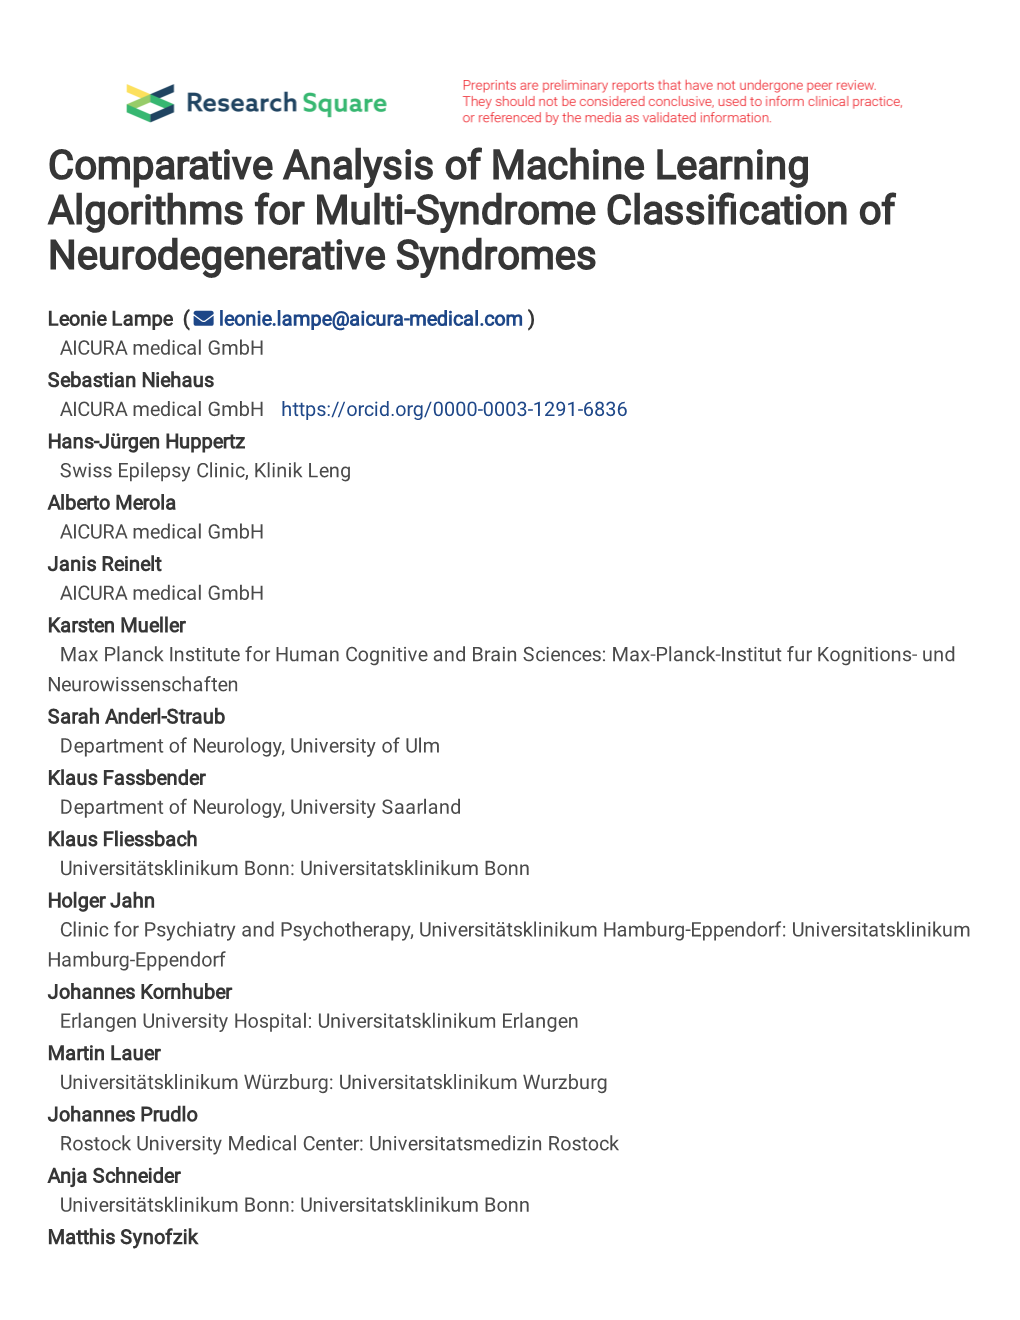 Comparative Analysis of Machine Learning Algorithms for Multi-Syndrome Classi�Cation of Neurodegenerative Syndromes